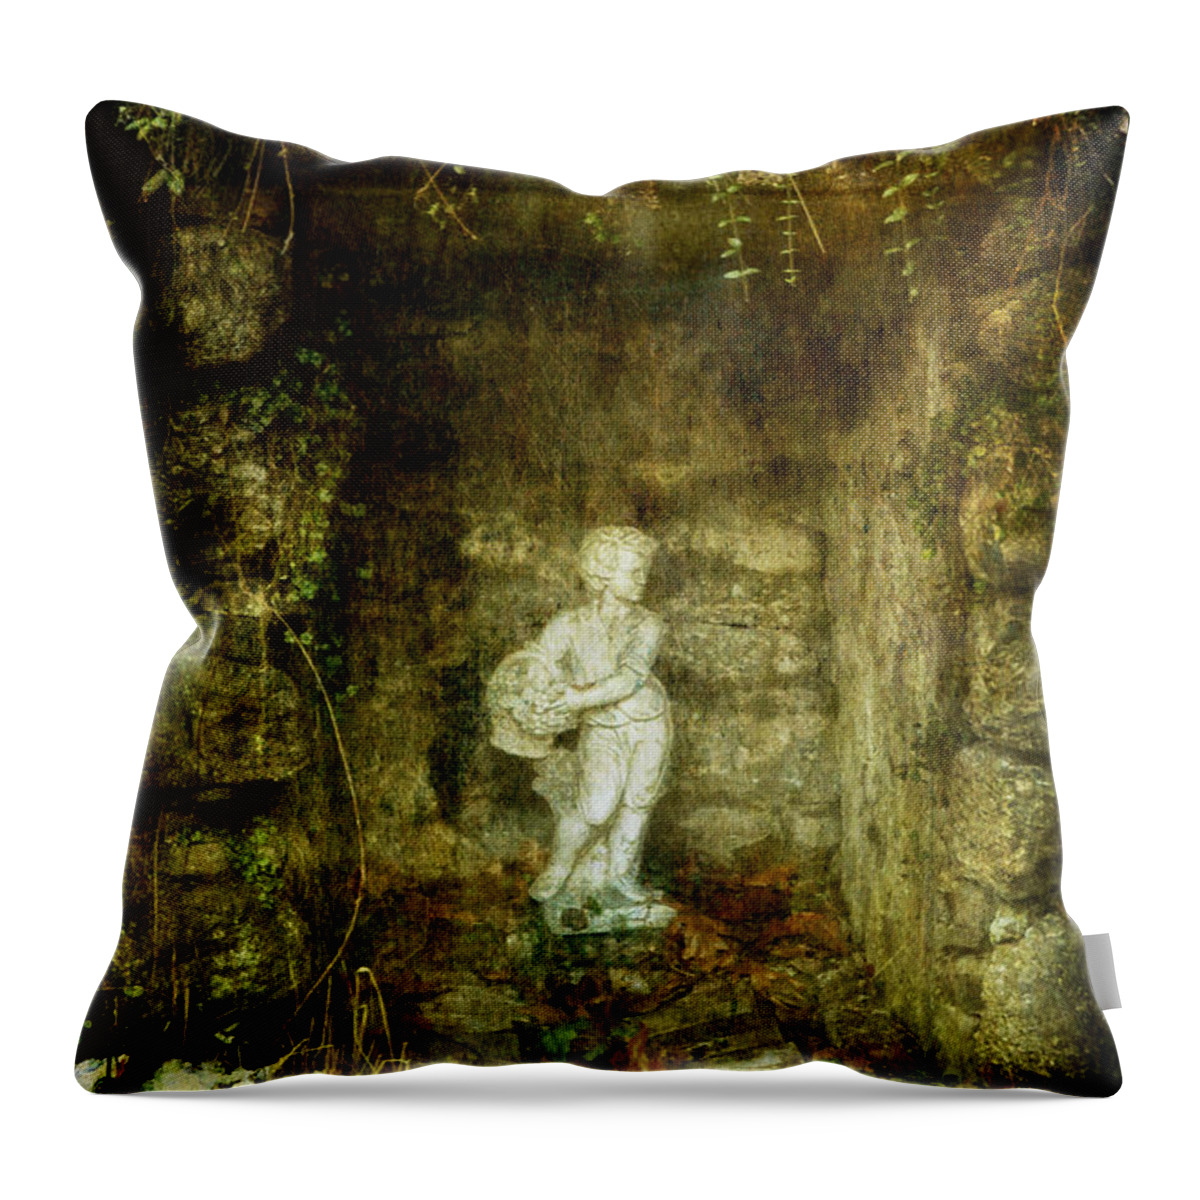 Statue Throw Pillow featuring the photograph The Cold Flower Boy by Debra Fedchin